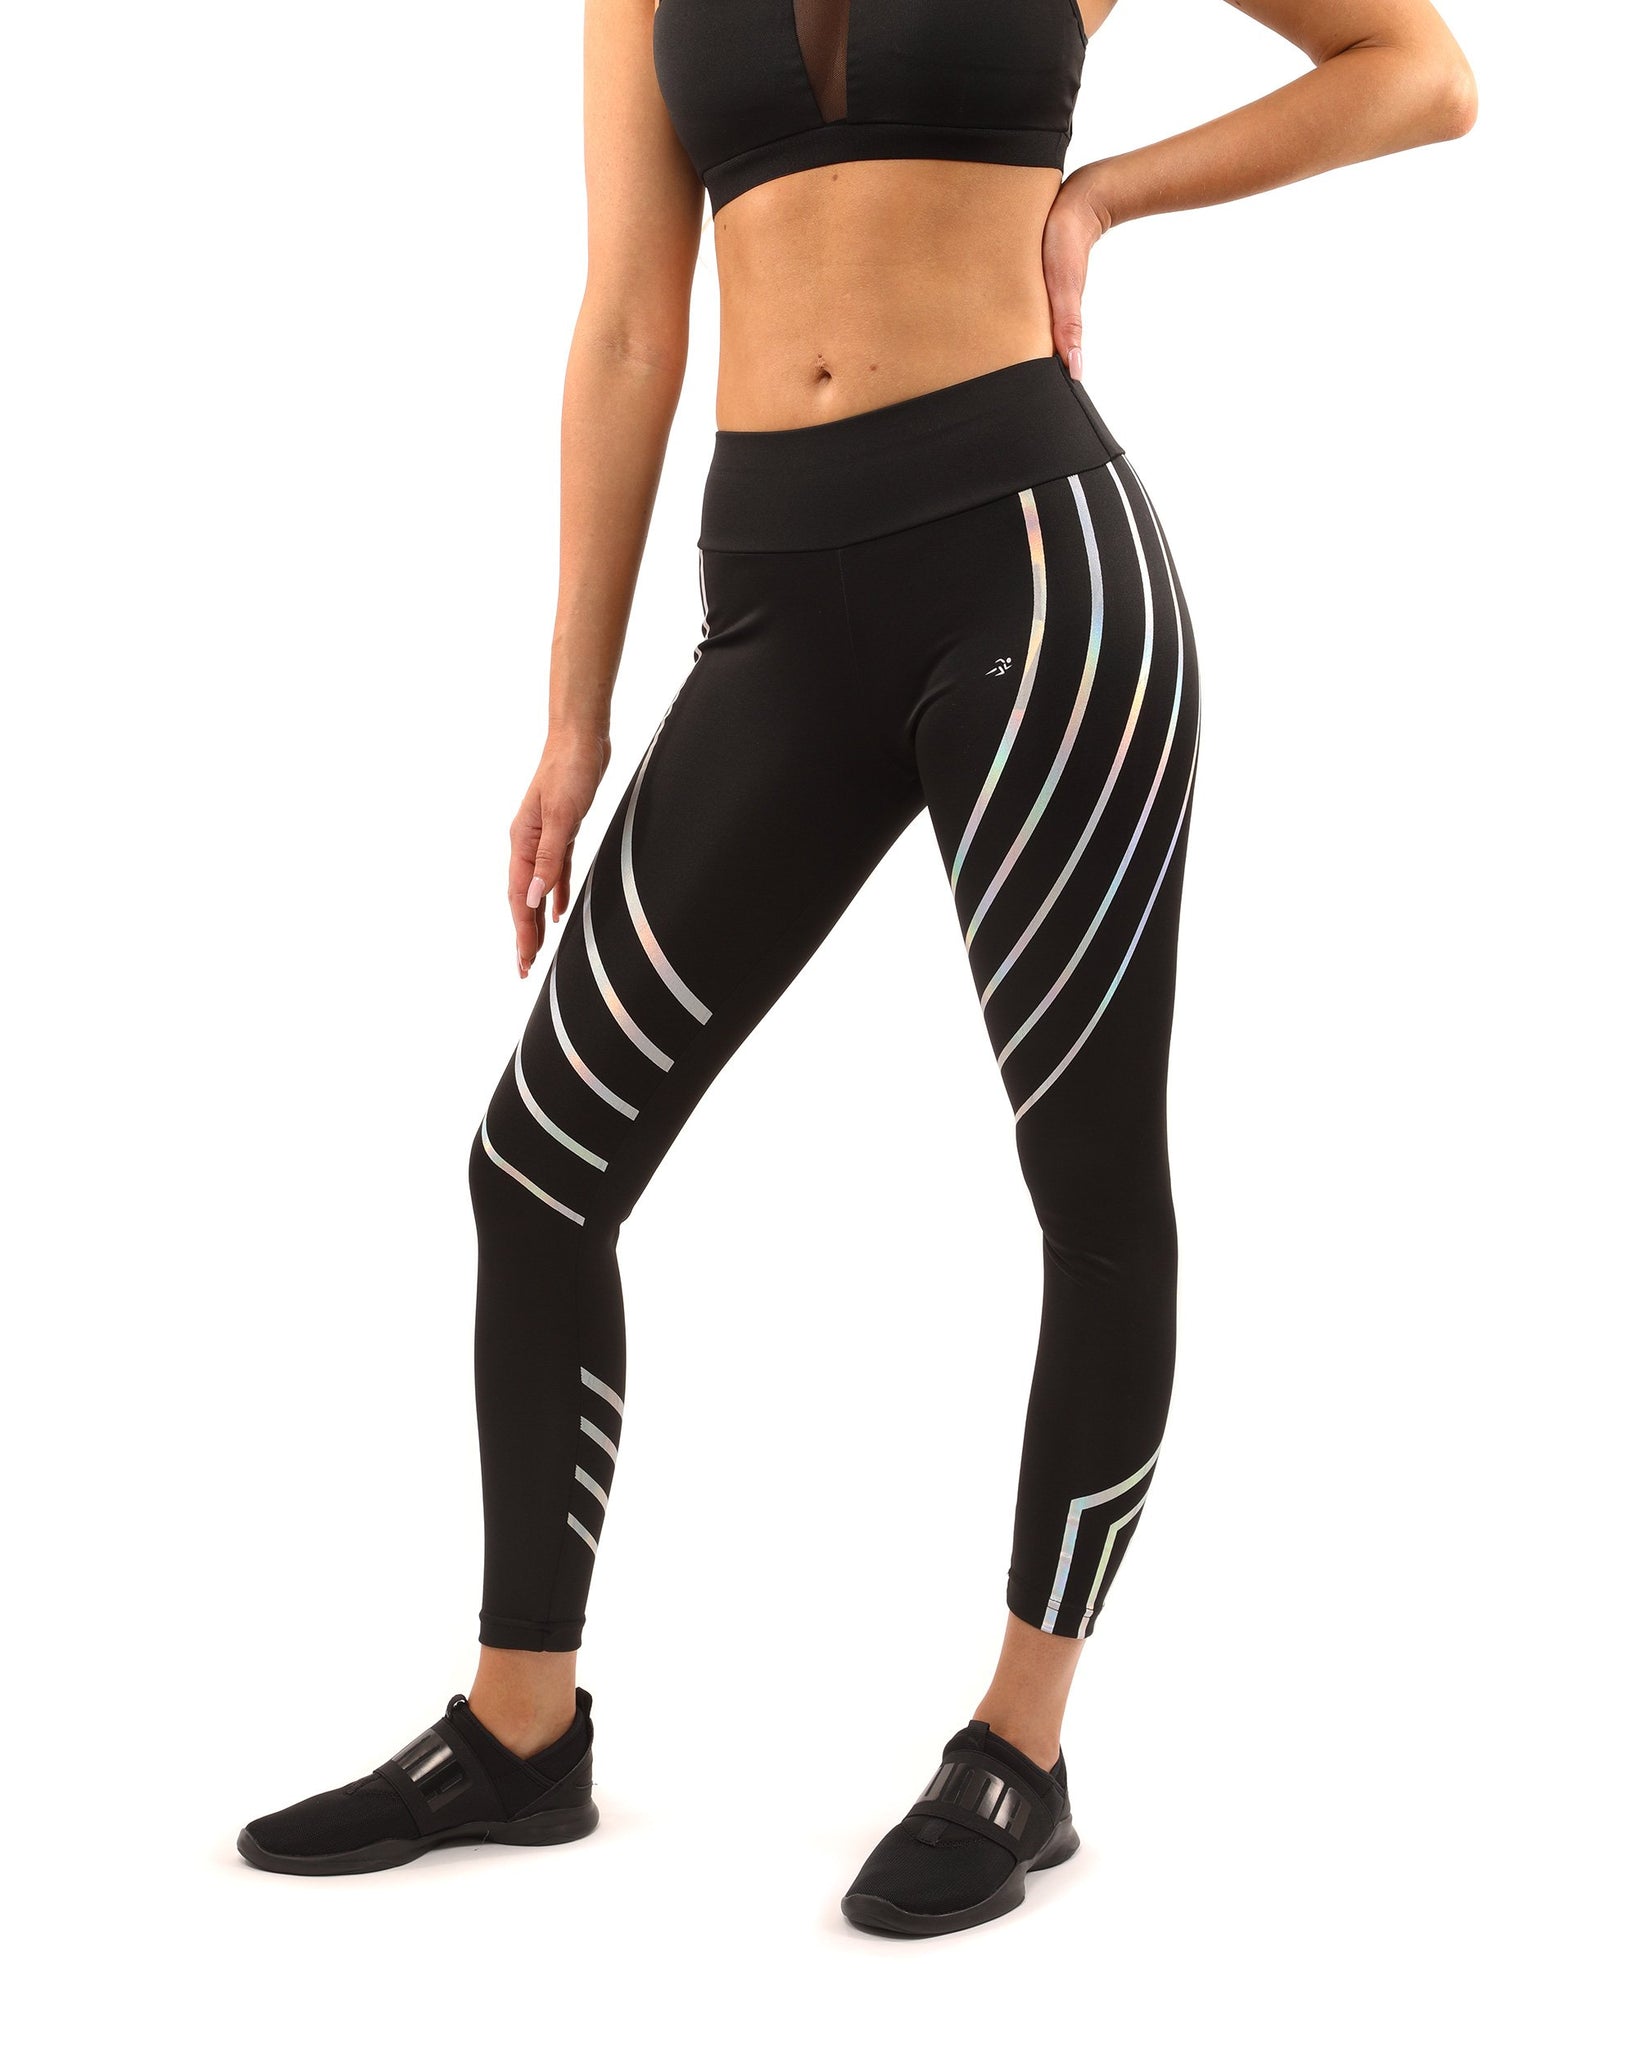 NWT Spyder Active Cold Weather Leggings - XL - black